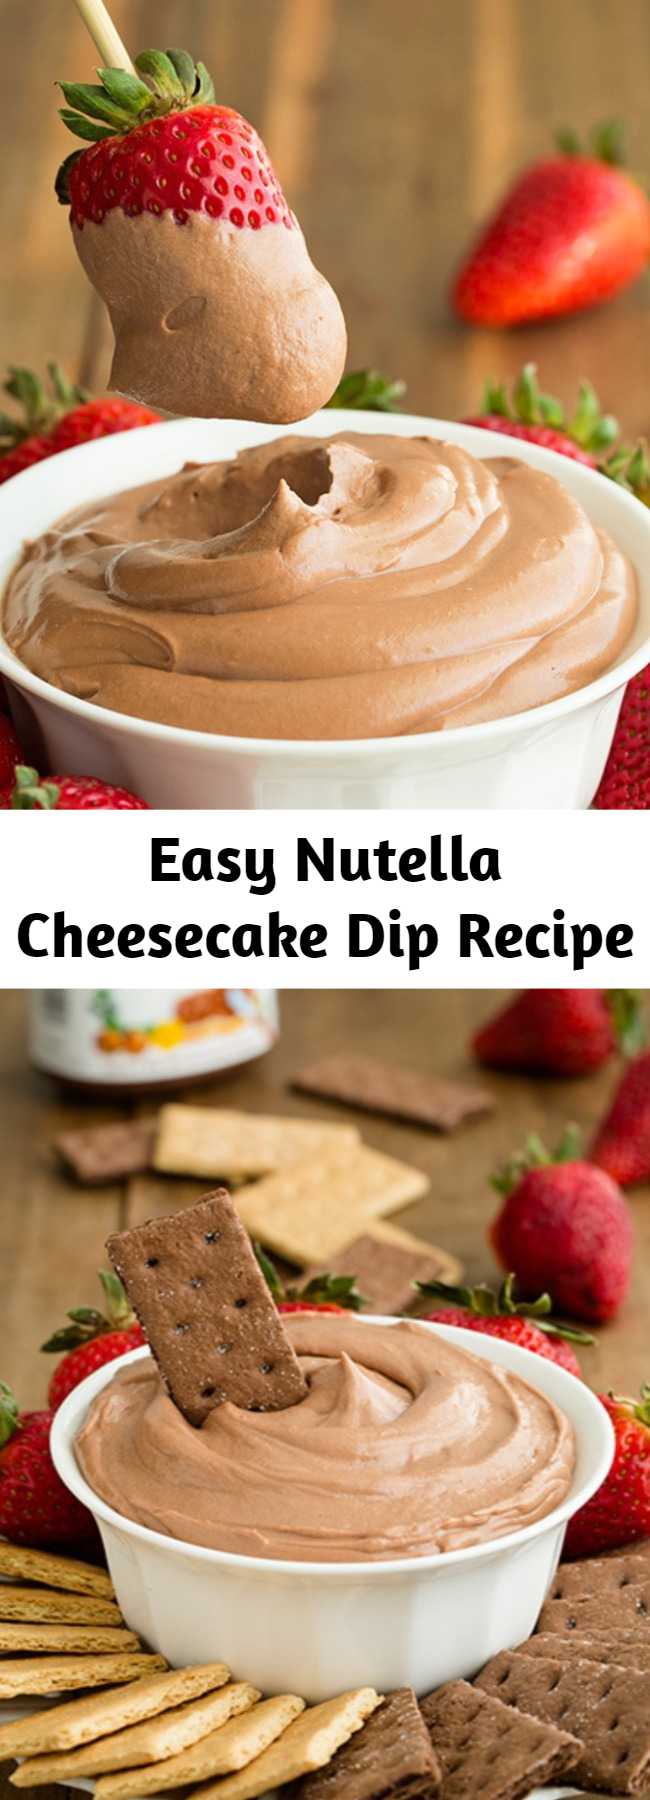 Easy Nutella Cheesecake Dip Recipe - A perfectly tempting, easy to make fruit dip that will leave everyone craving more! This is brimming with a rich chocolatey cheesecake flavor thanks to the irresistible Nutella and luscious cream cheese and it's the perfect compliment to berries and bananas. People of all ages will love it!